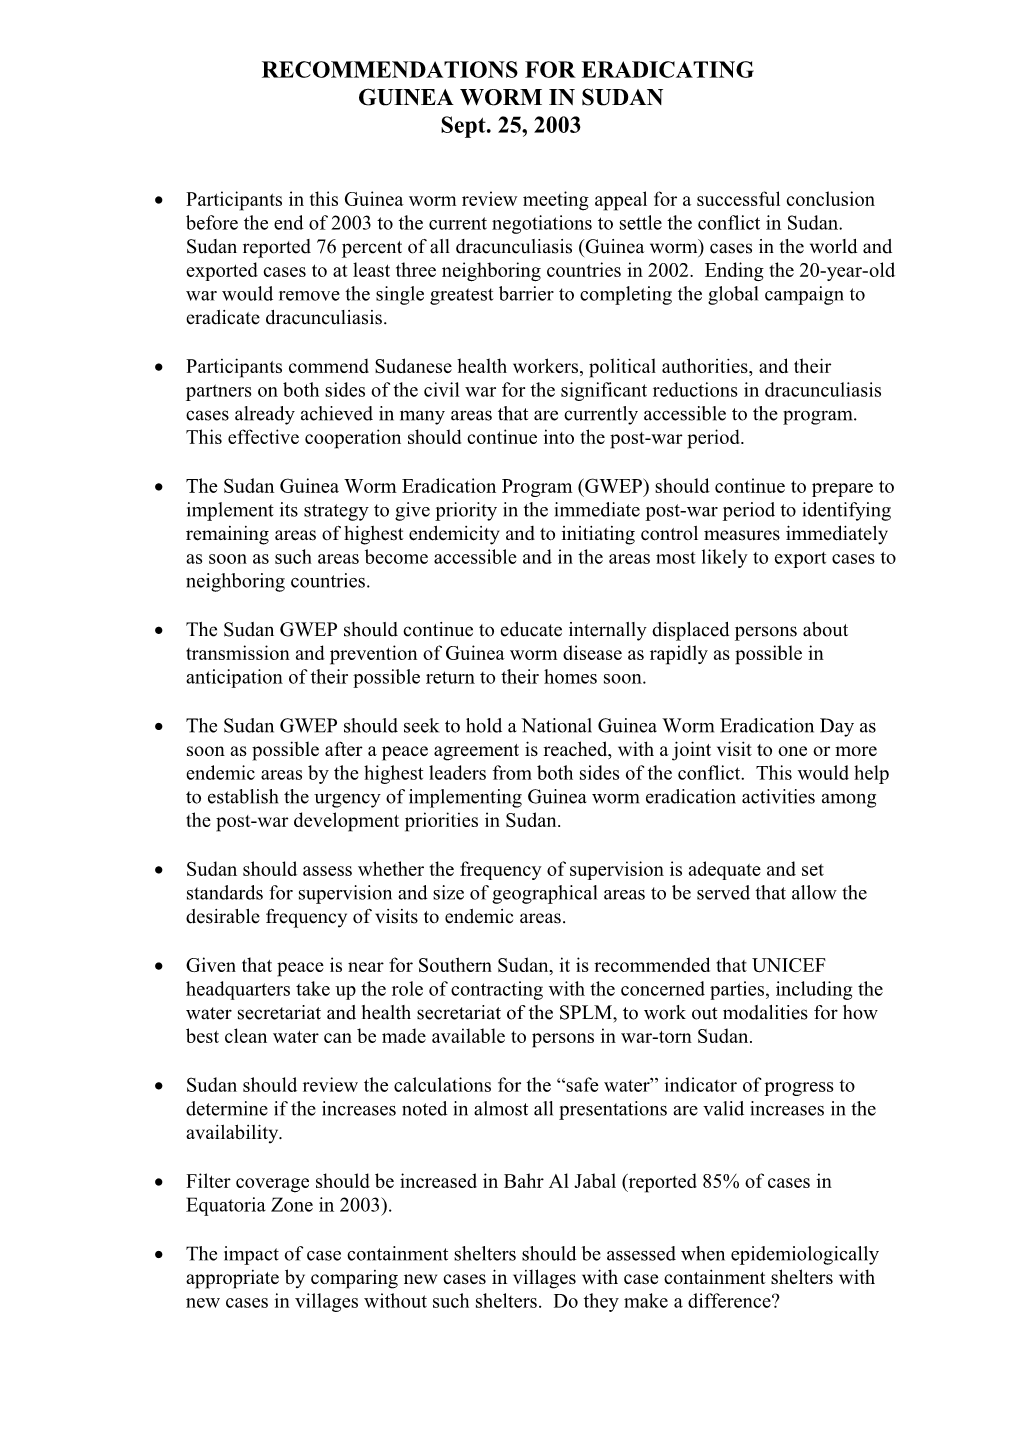 Draft Recommendations for Sudan